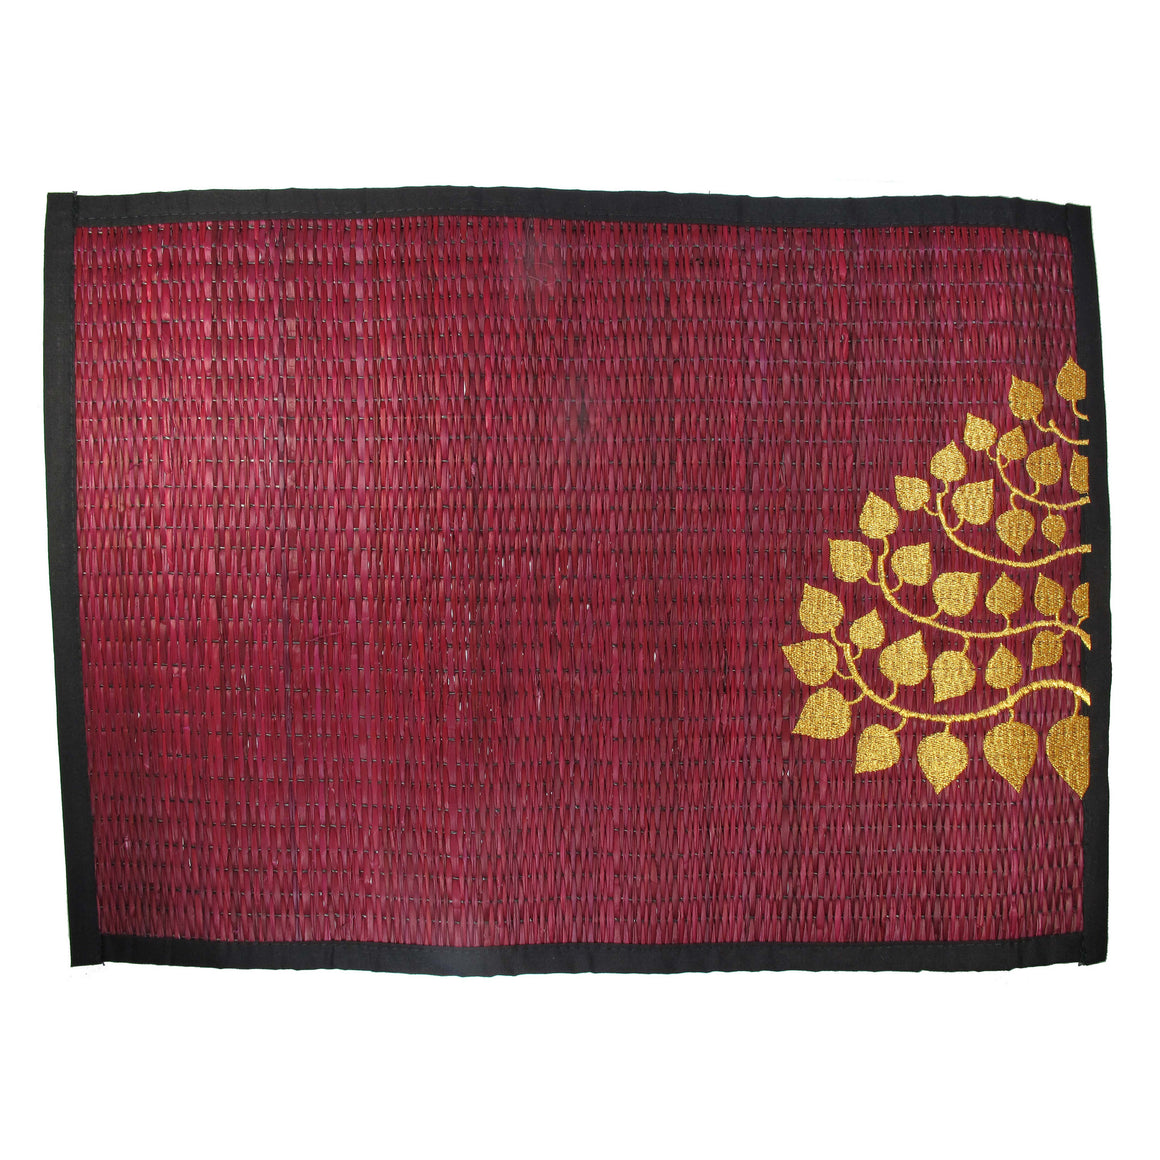 Woven Reed Placemats, Approx. 12" x 16", 4-Pack, Gold Bodhi Tree on Red - TropicaZona